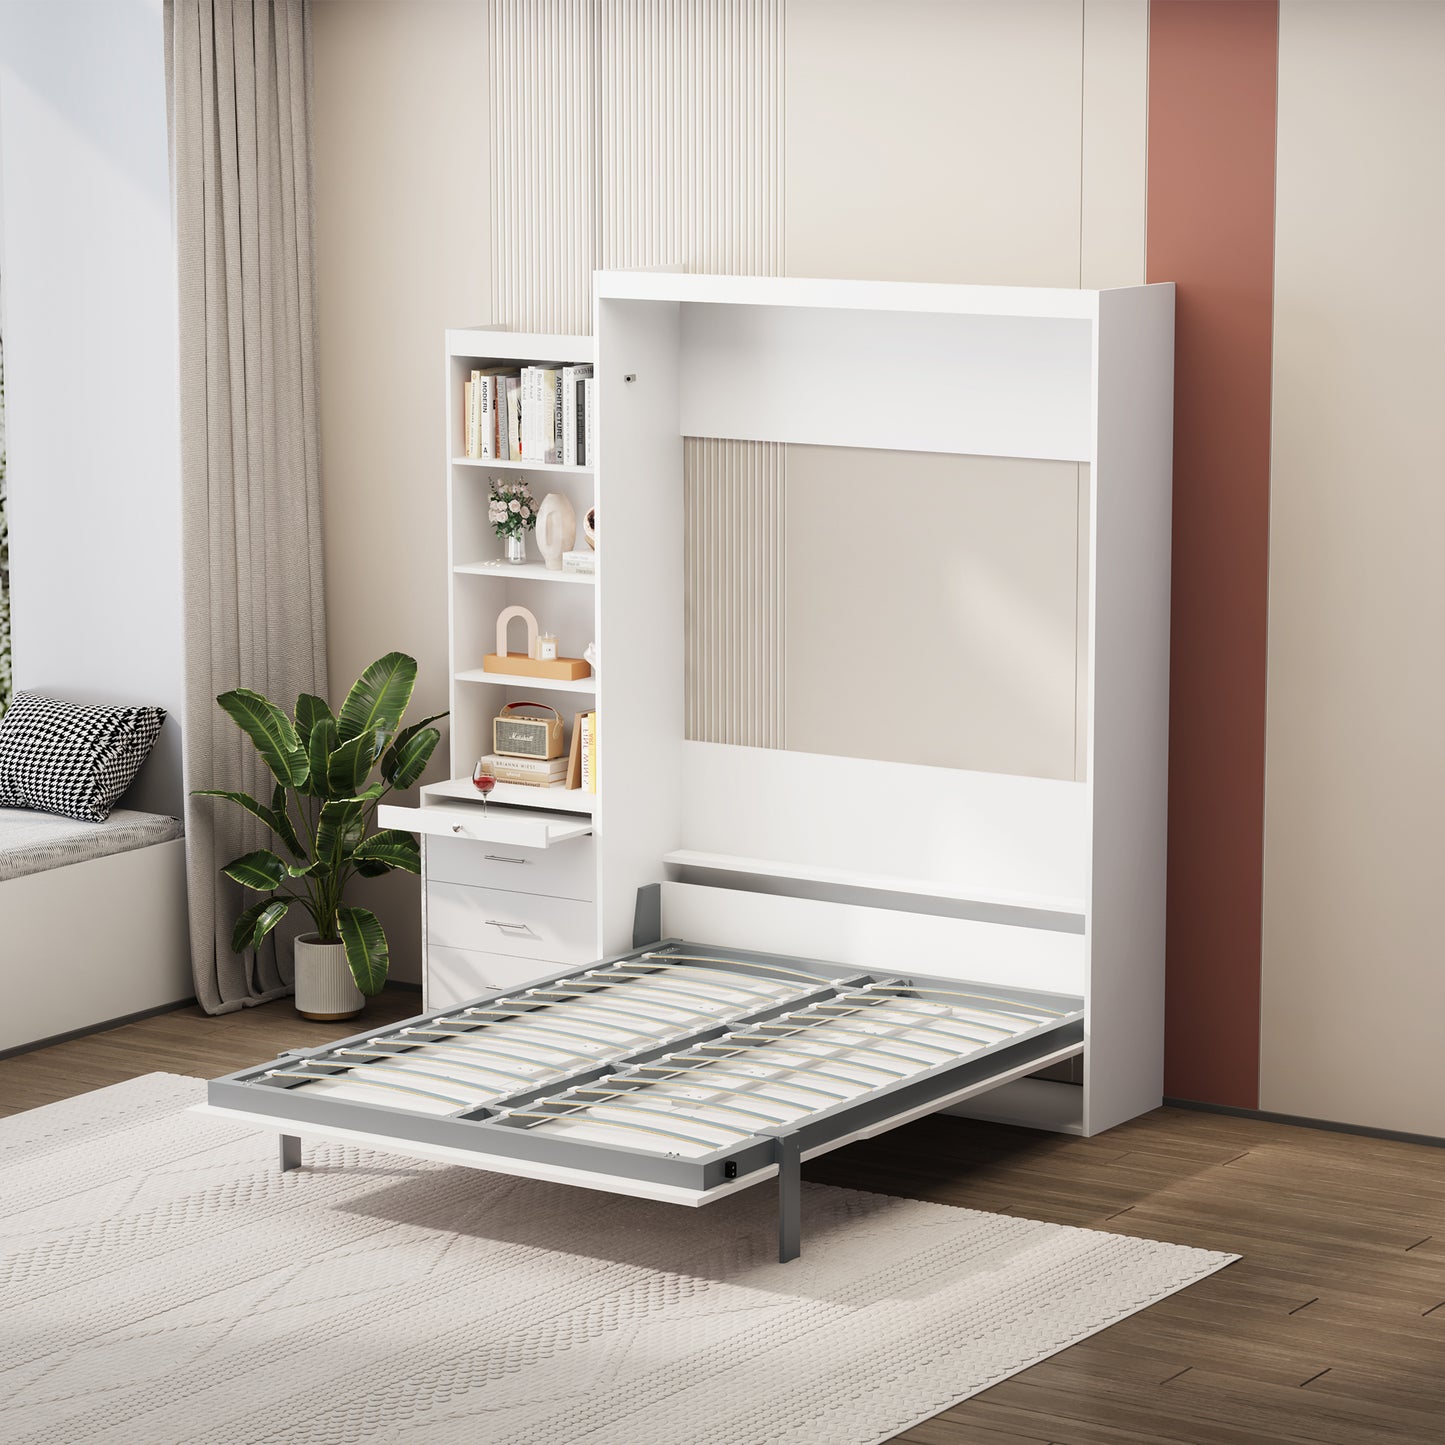 Morden Deisgn Full Size Vertical Murphy Bed with Shelf and Drawers for Bedroom or Guestroom White Wall Bed Space Saving Hidden Bed with New Style Gas Struts